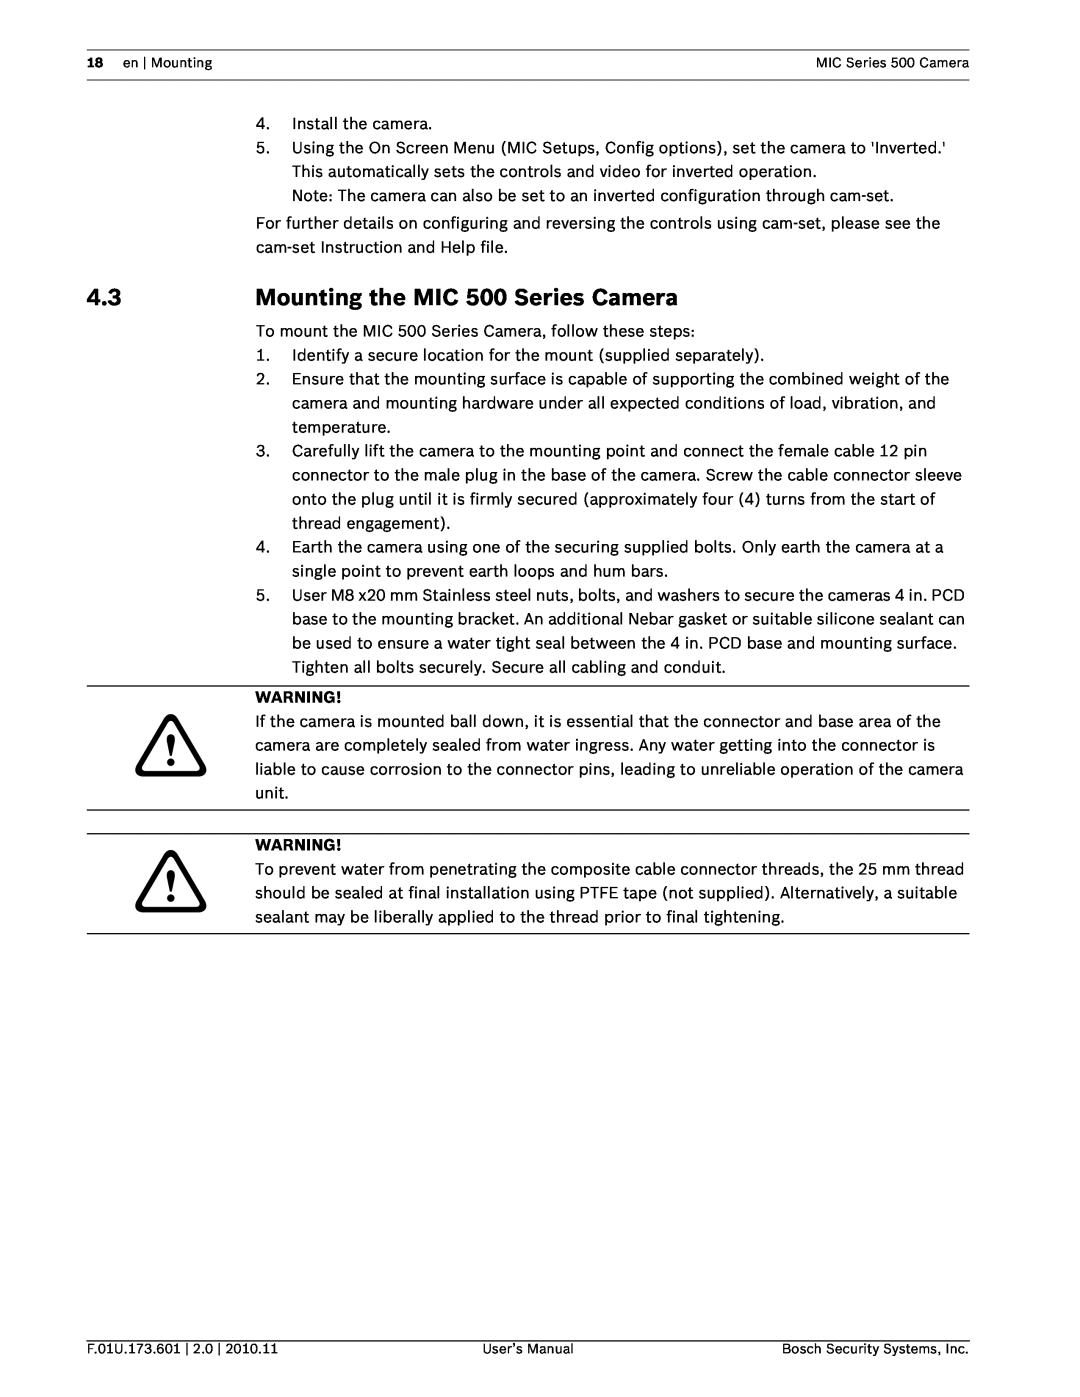 Bosch Appliances user manual Mounting the MIC 500 Series Camera 